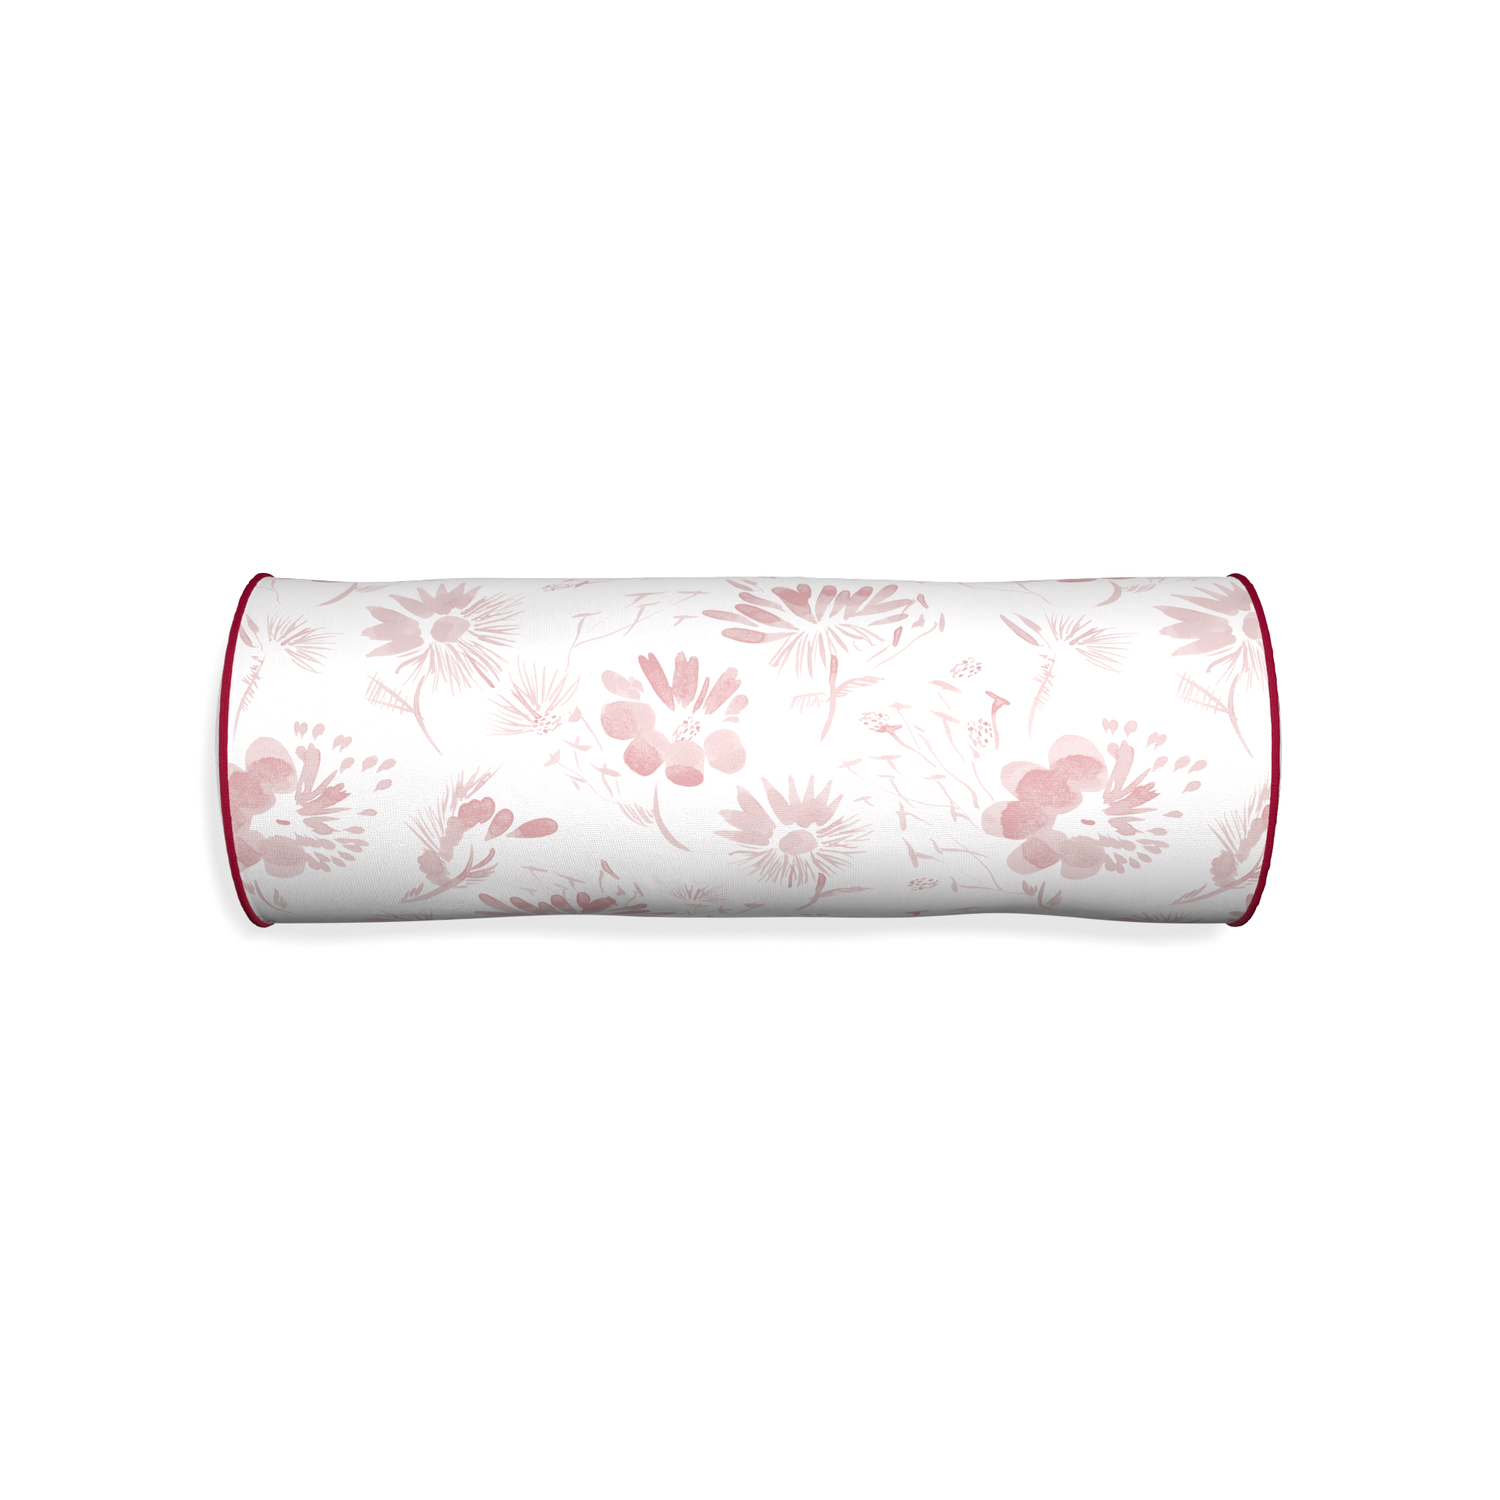 Bolster blake custom pink floralpillow with raspberry piping on white background